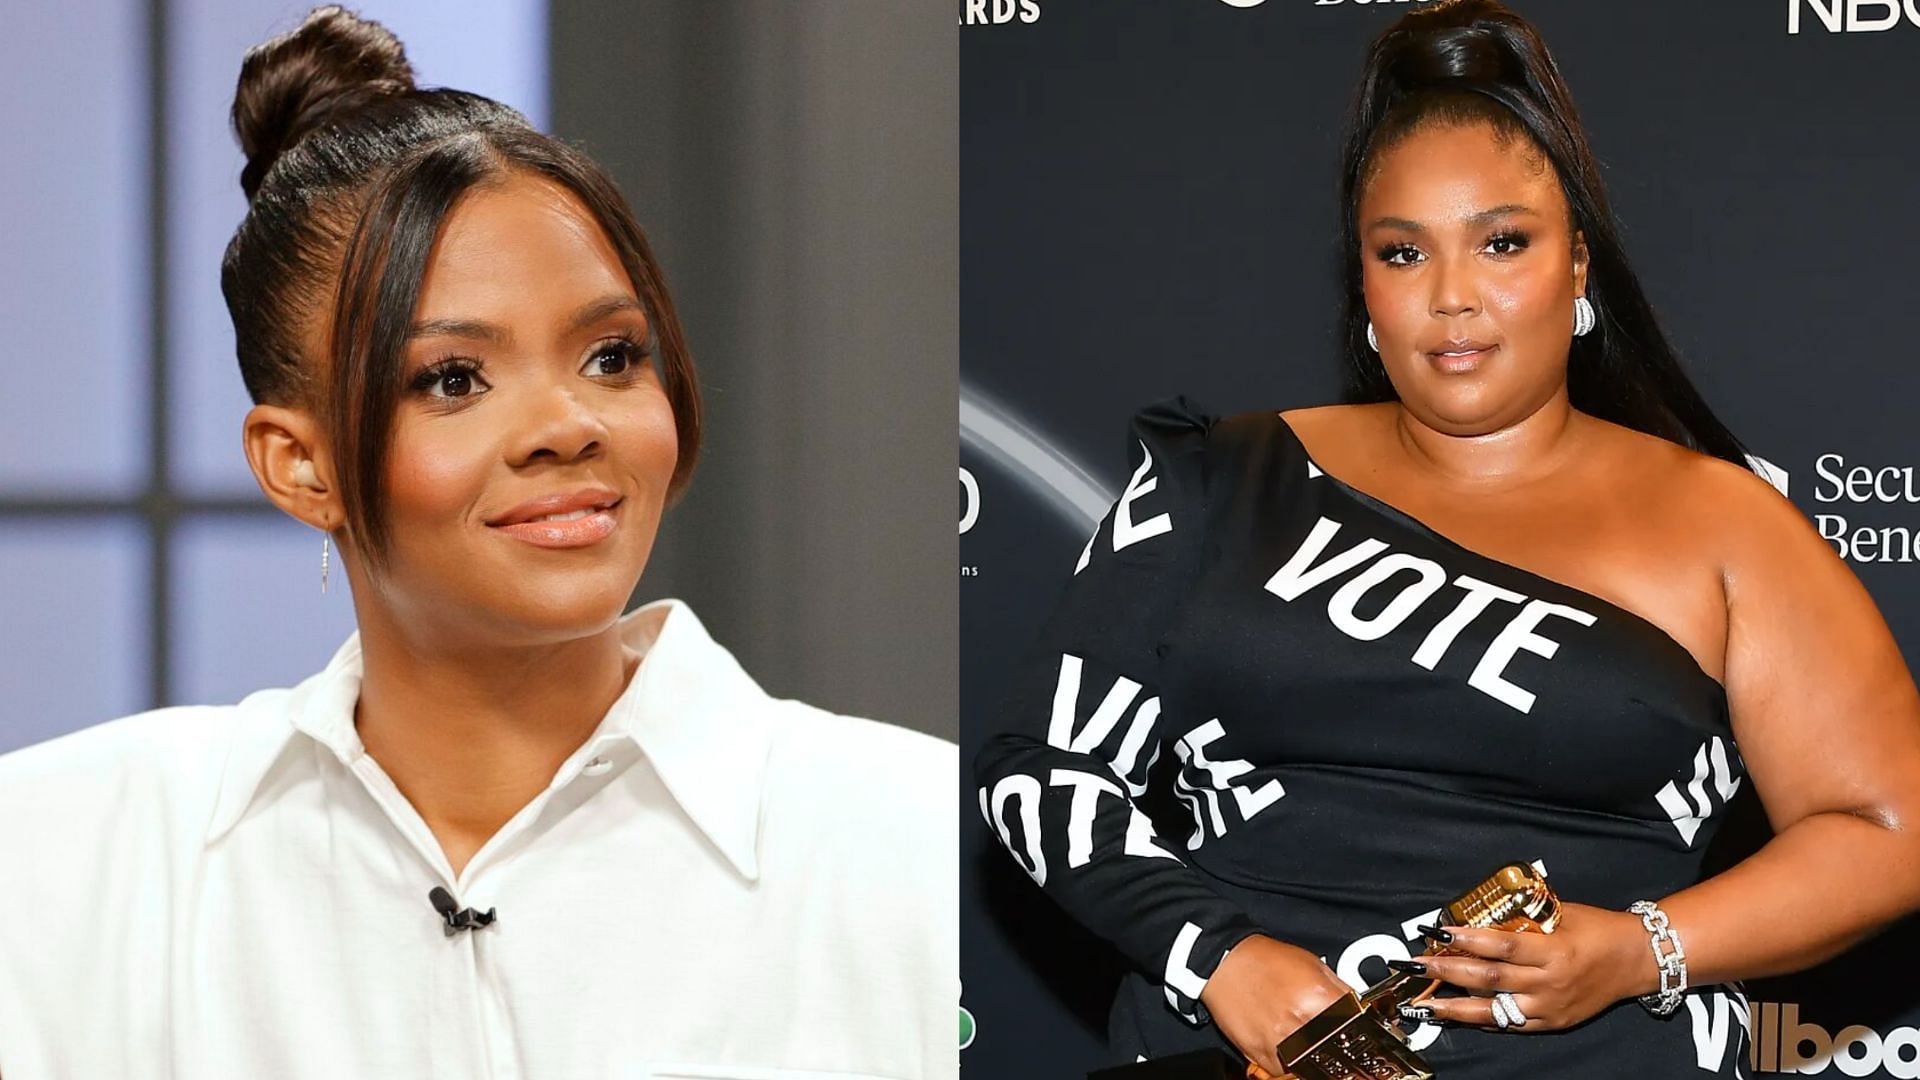 Candace Owens and Lizzo. (Photo via Jason Kempin/Getty Images, Amy Sussman/Getty Images)